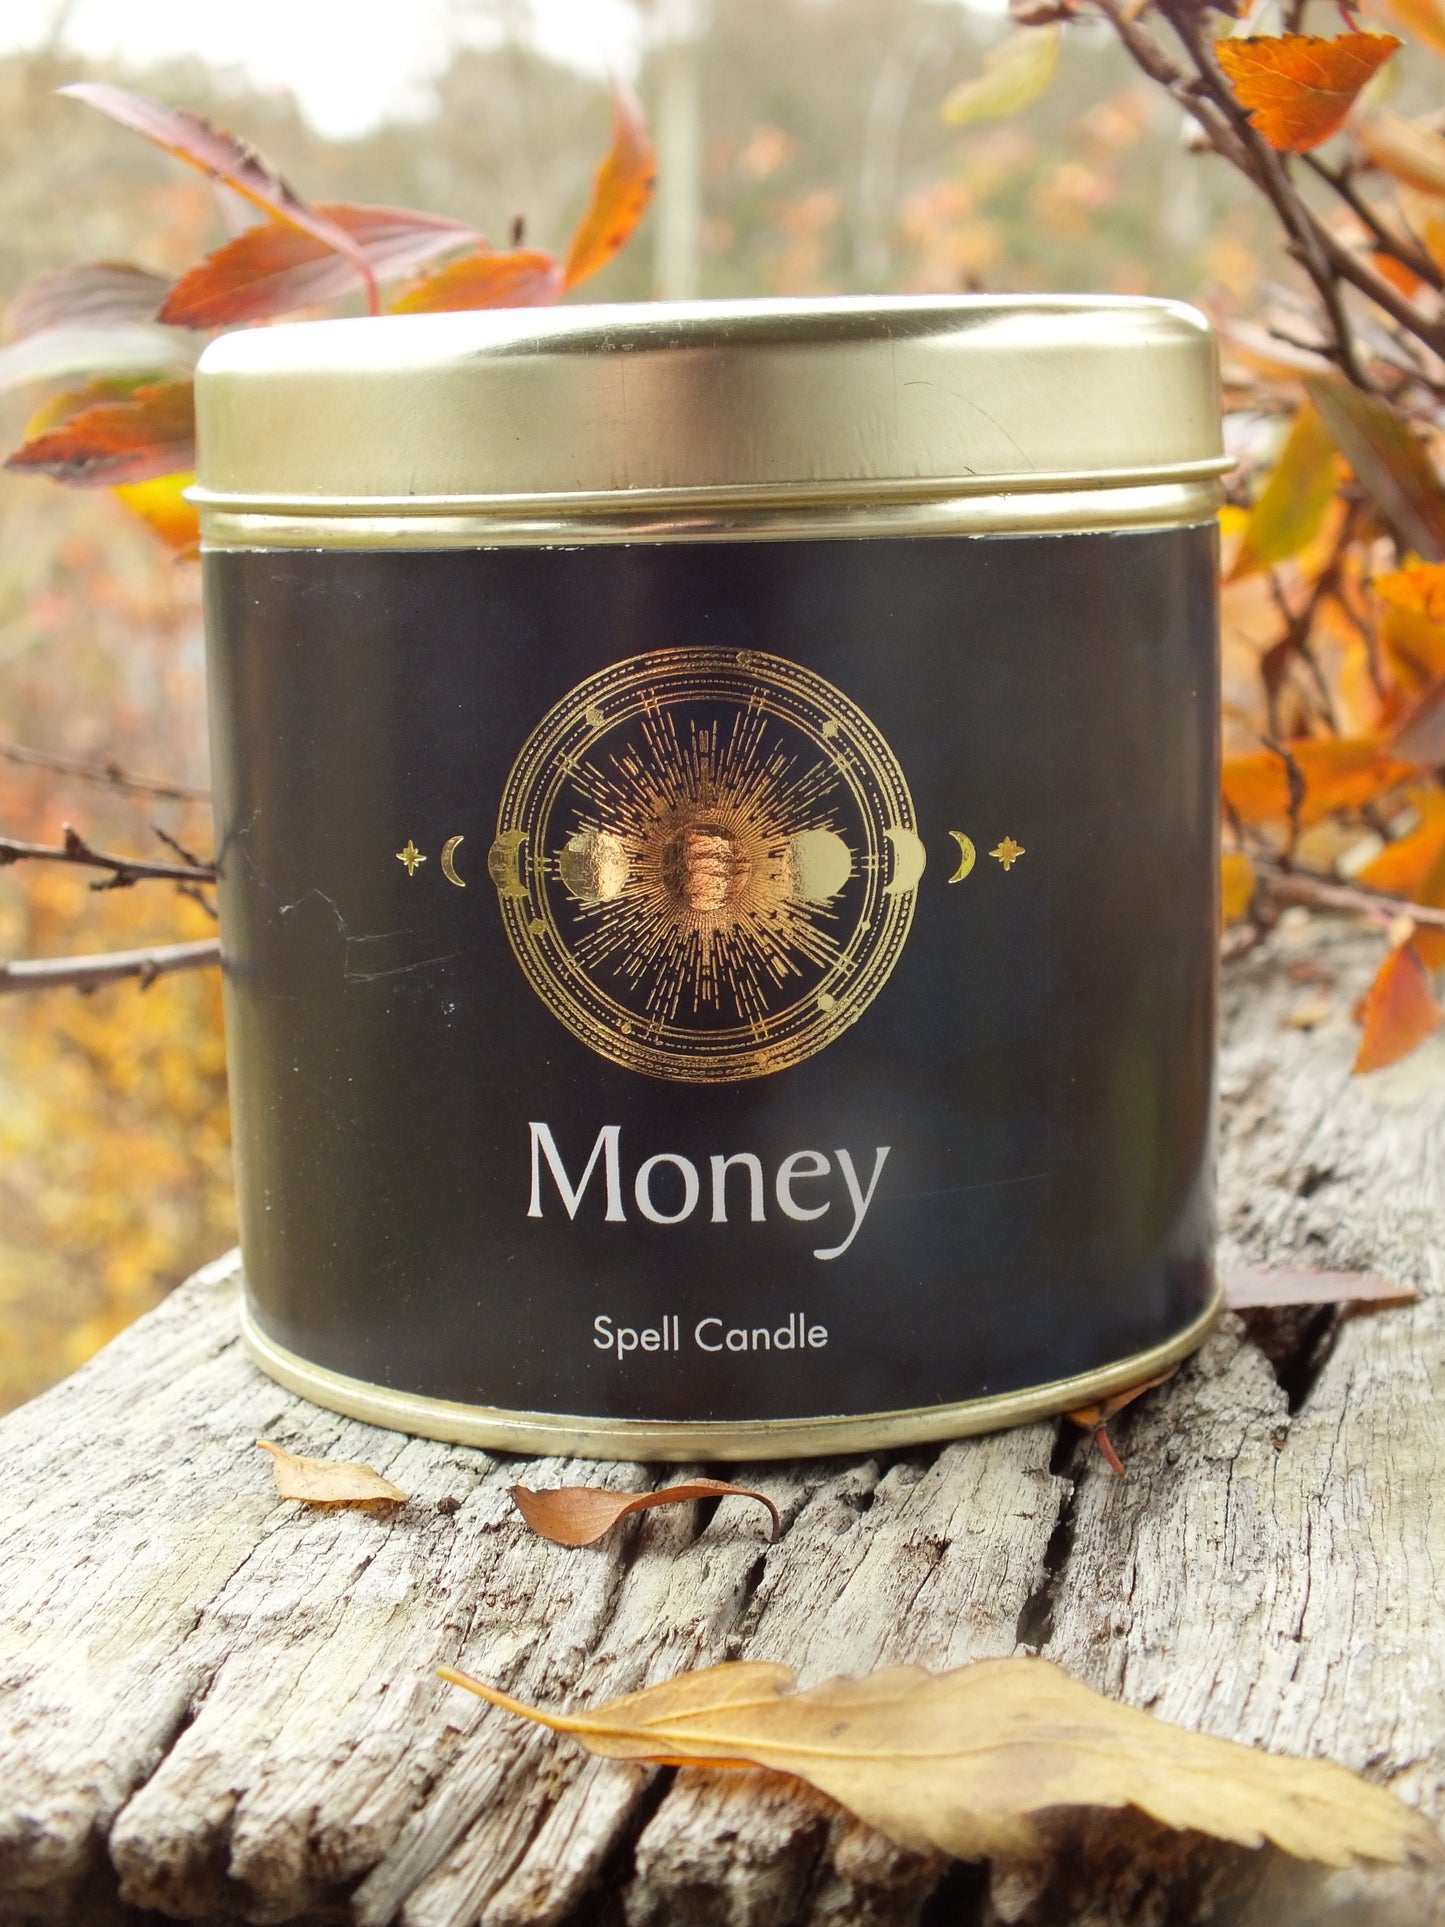 Magic Spell Candle - Money